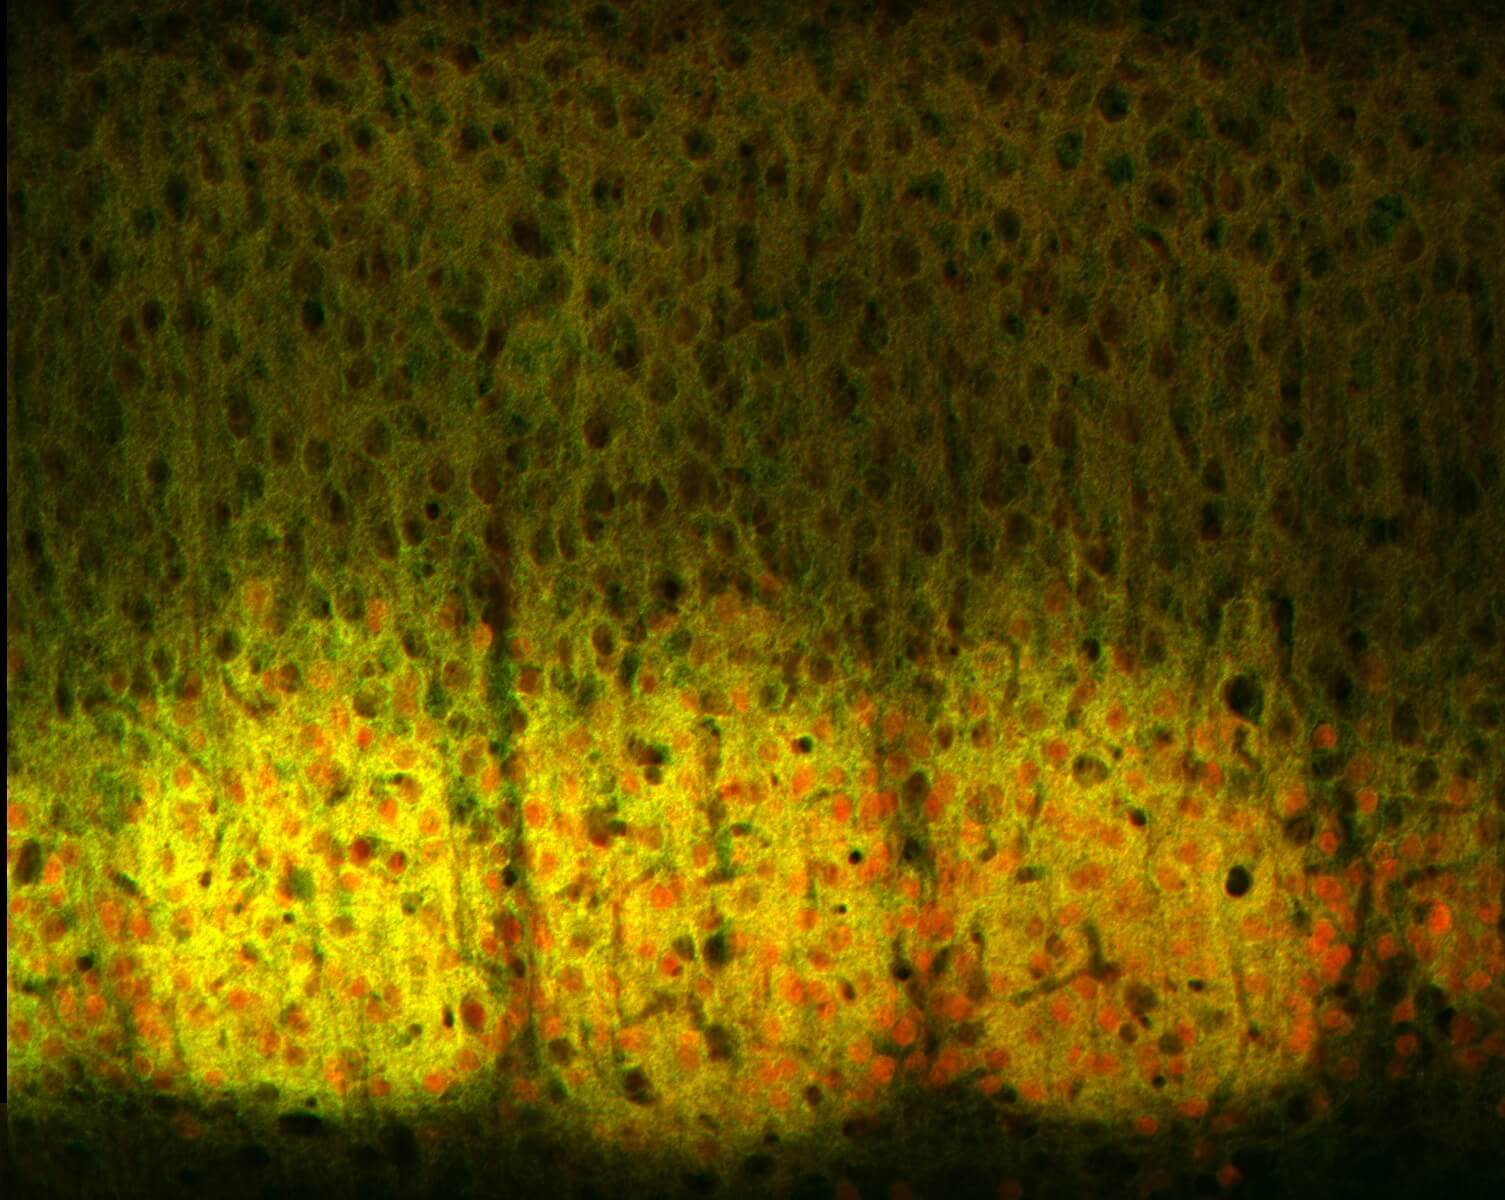 Fluorescent microscopy of oval-shaped orange cell structures within a yellow-green matrix.